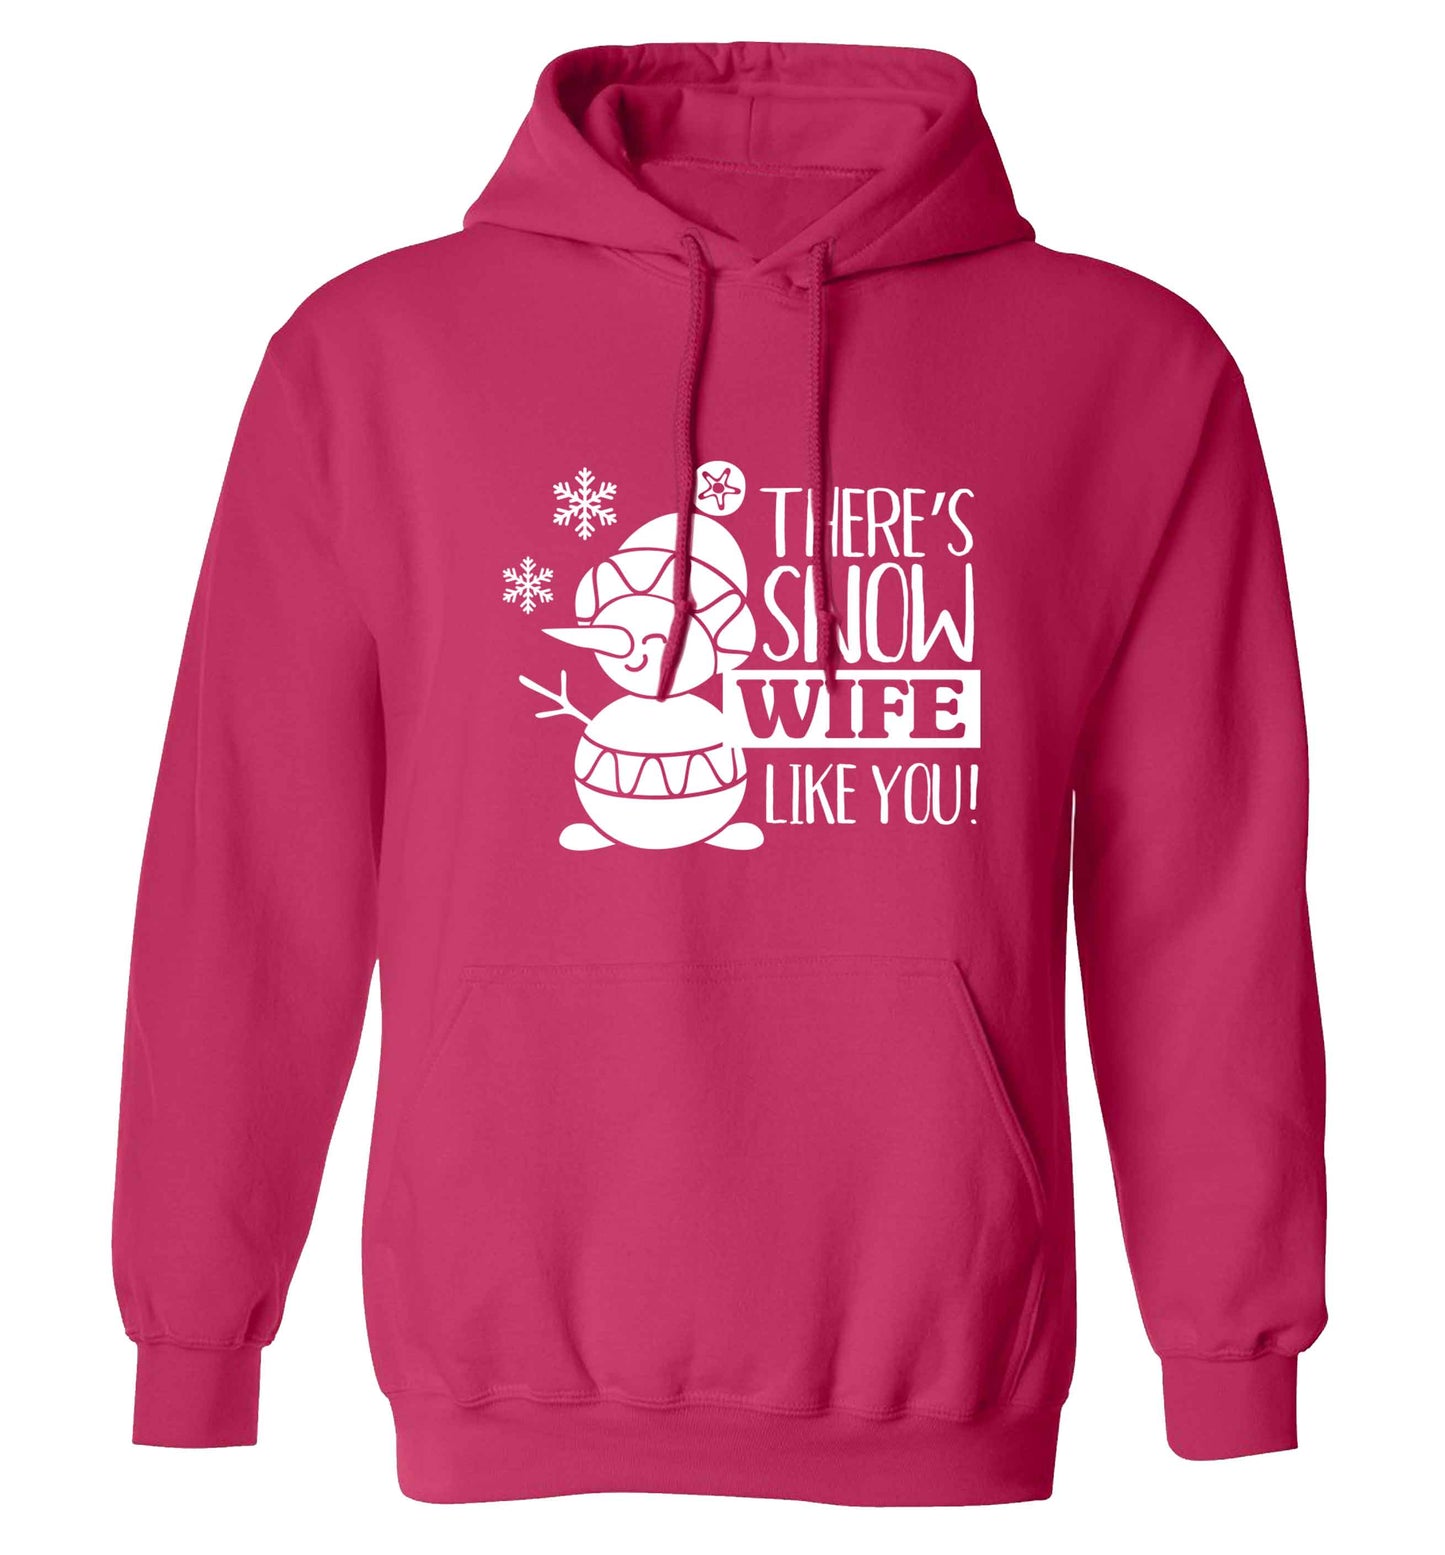 There's snow wife like you adults unisex pink hoodie 2XL